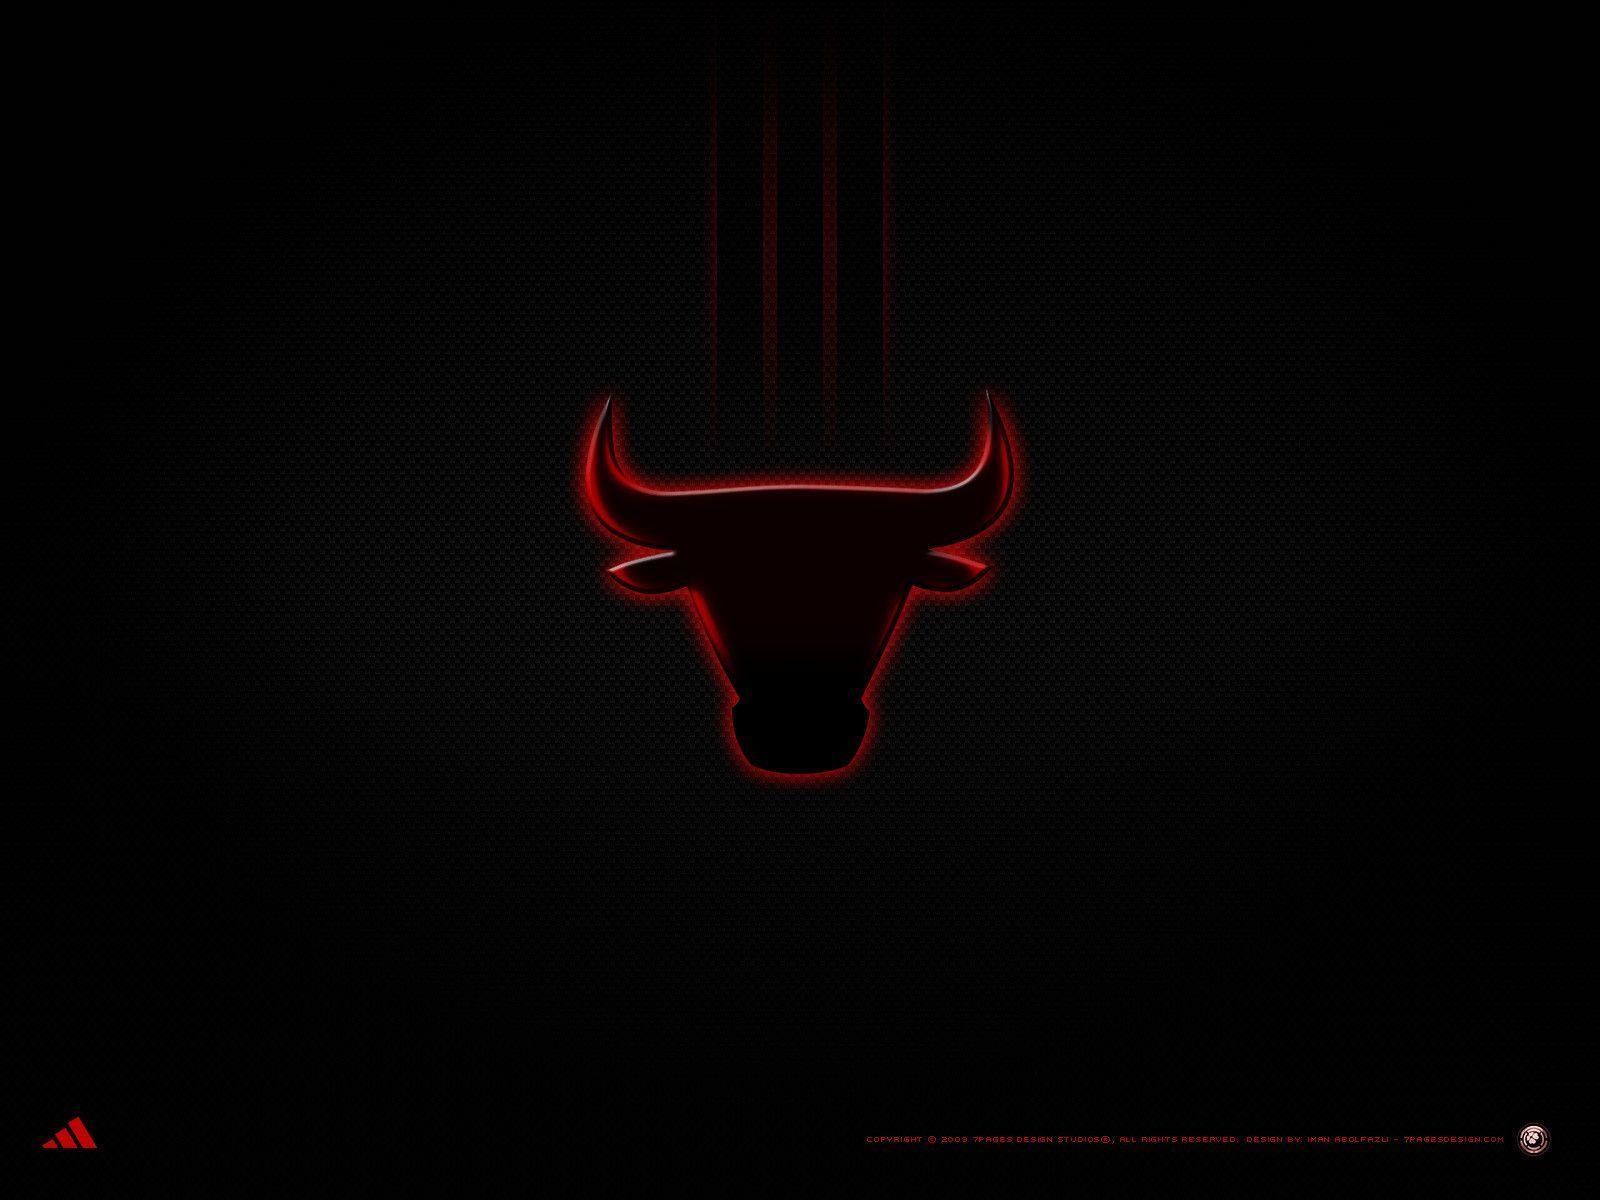 2013 Chicago Bulls Wallpapers HD 1 24496 Image HD Wallpapers